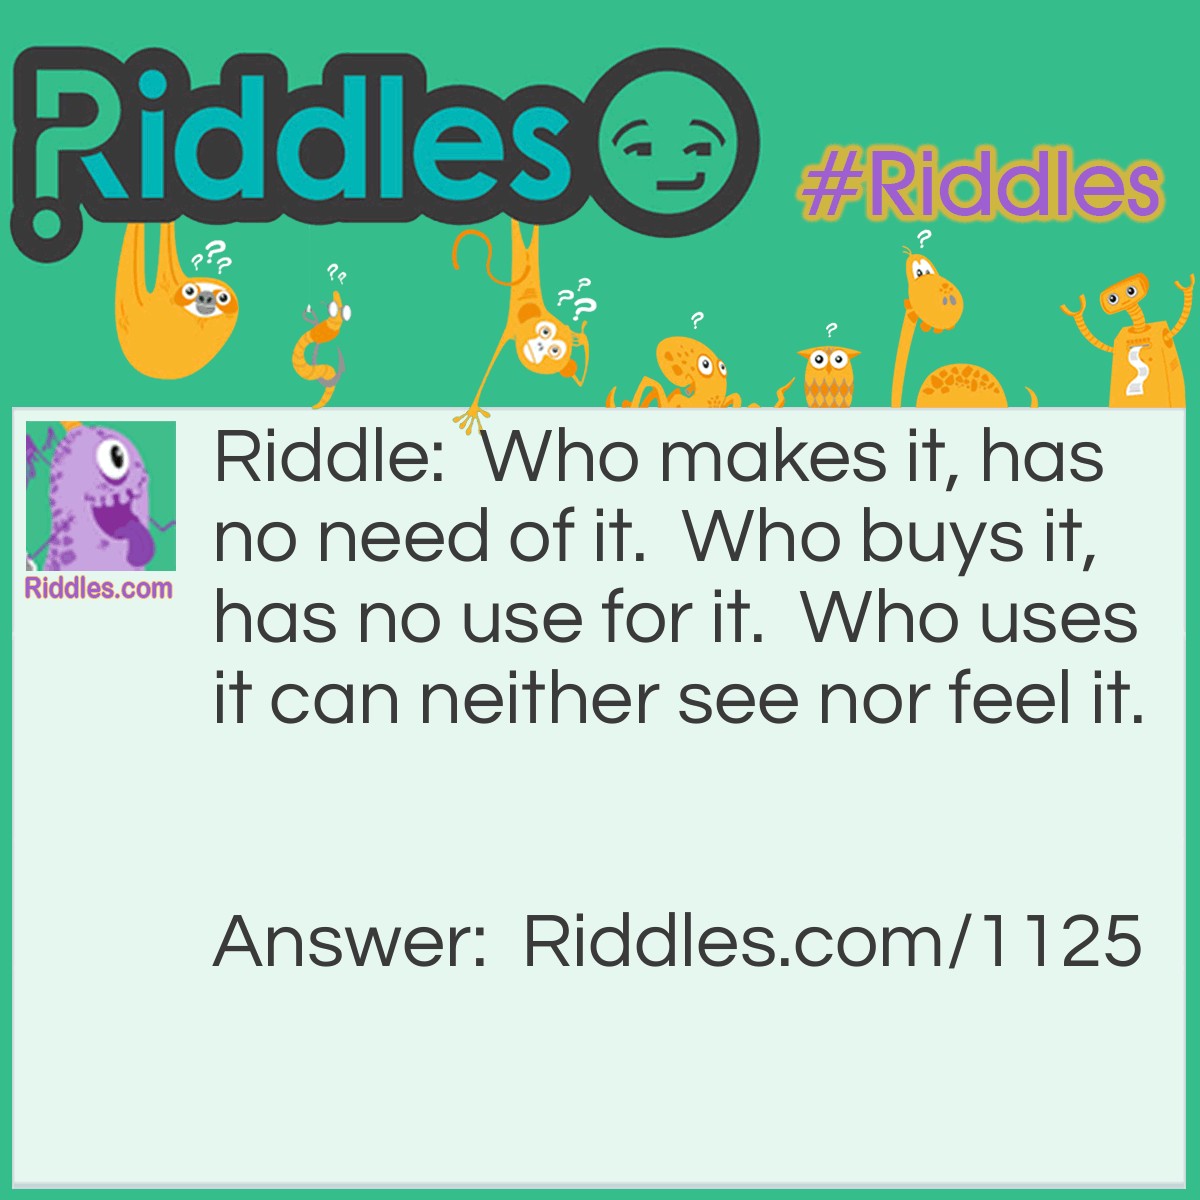 Riddle: Who makes it, has no need of it.  Who buys it, has no use for it.  Who uses it can neither see nor feel it. What is it? Answer: A coffin.